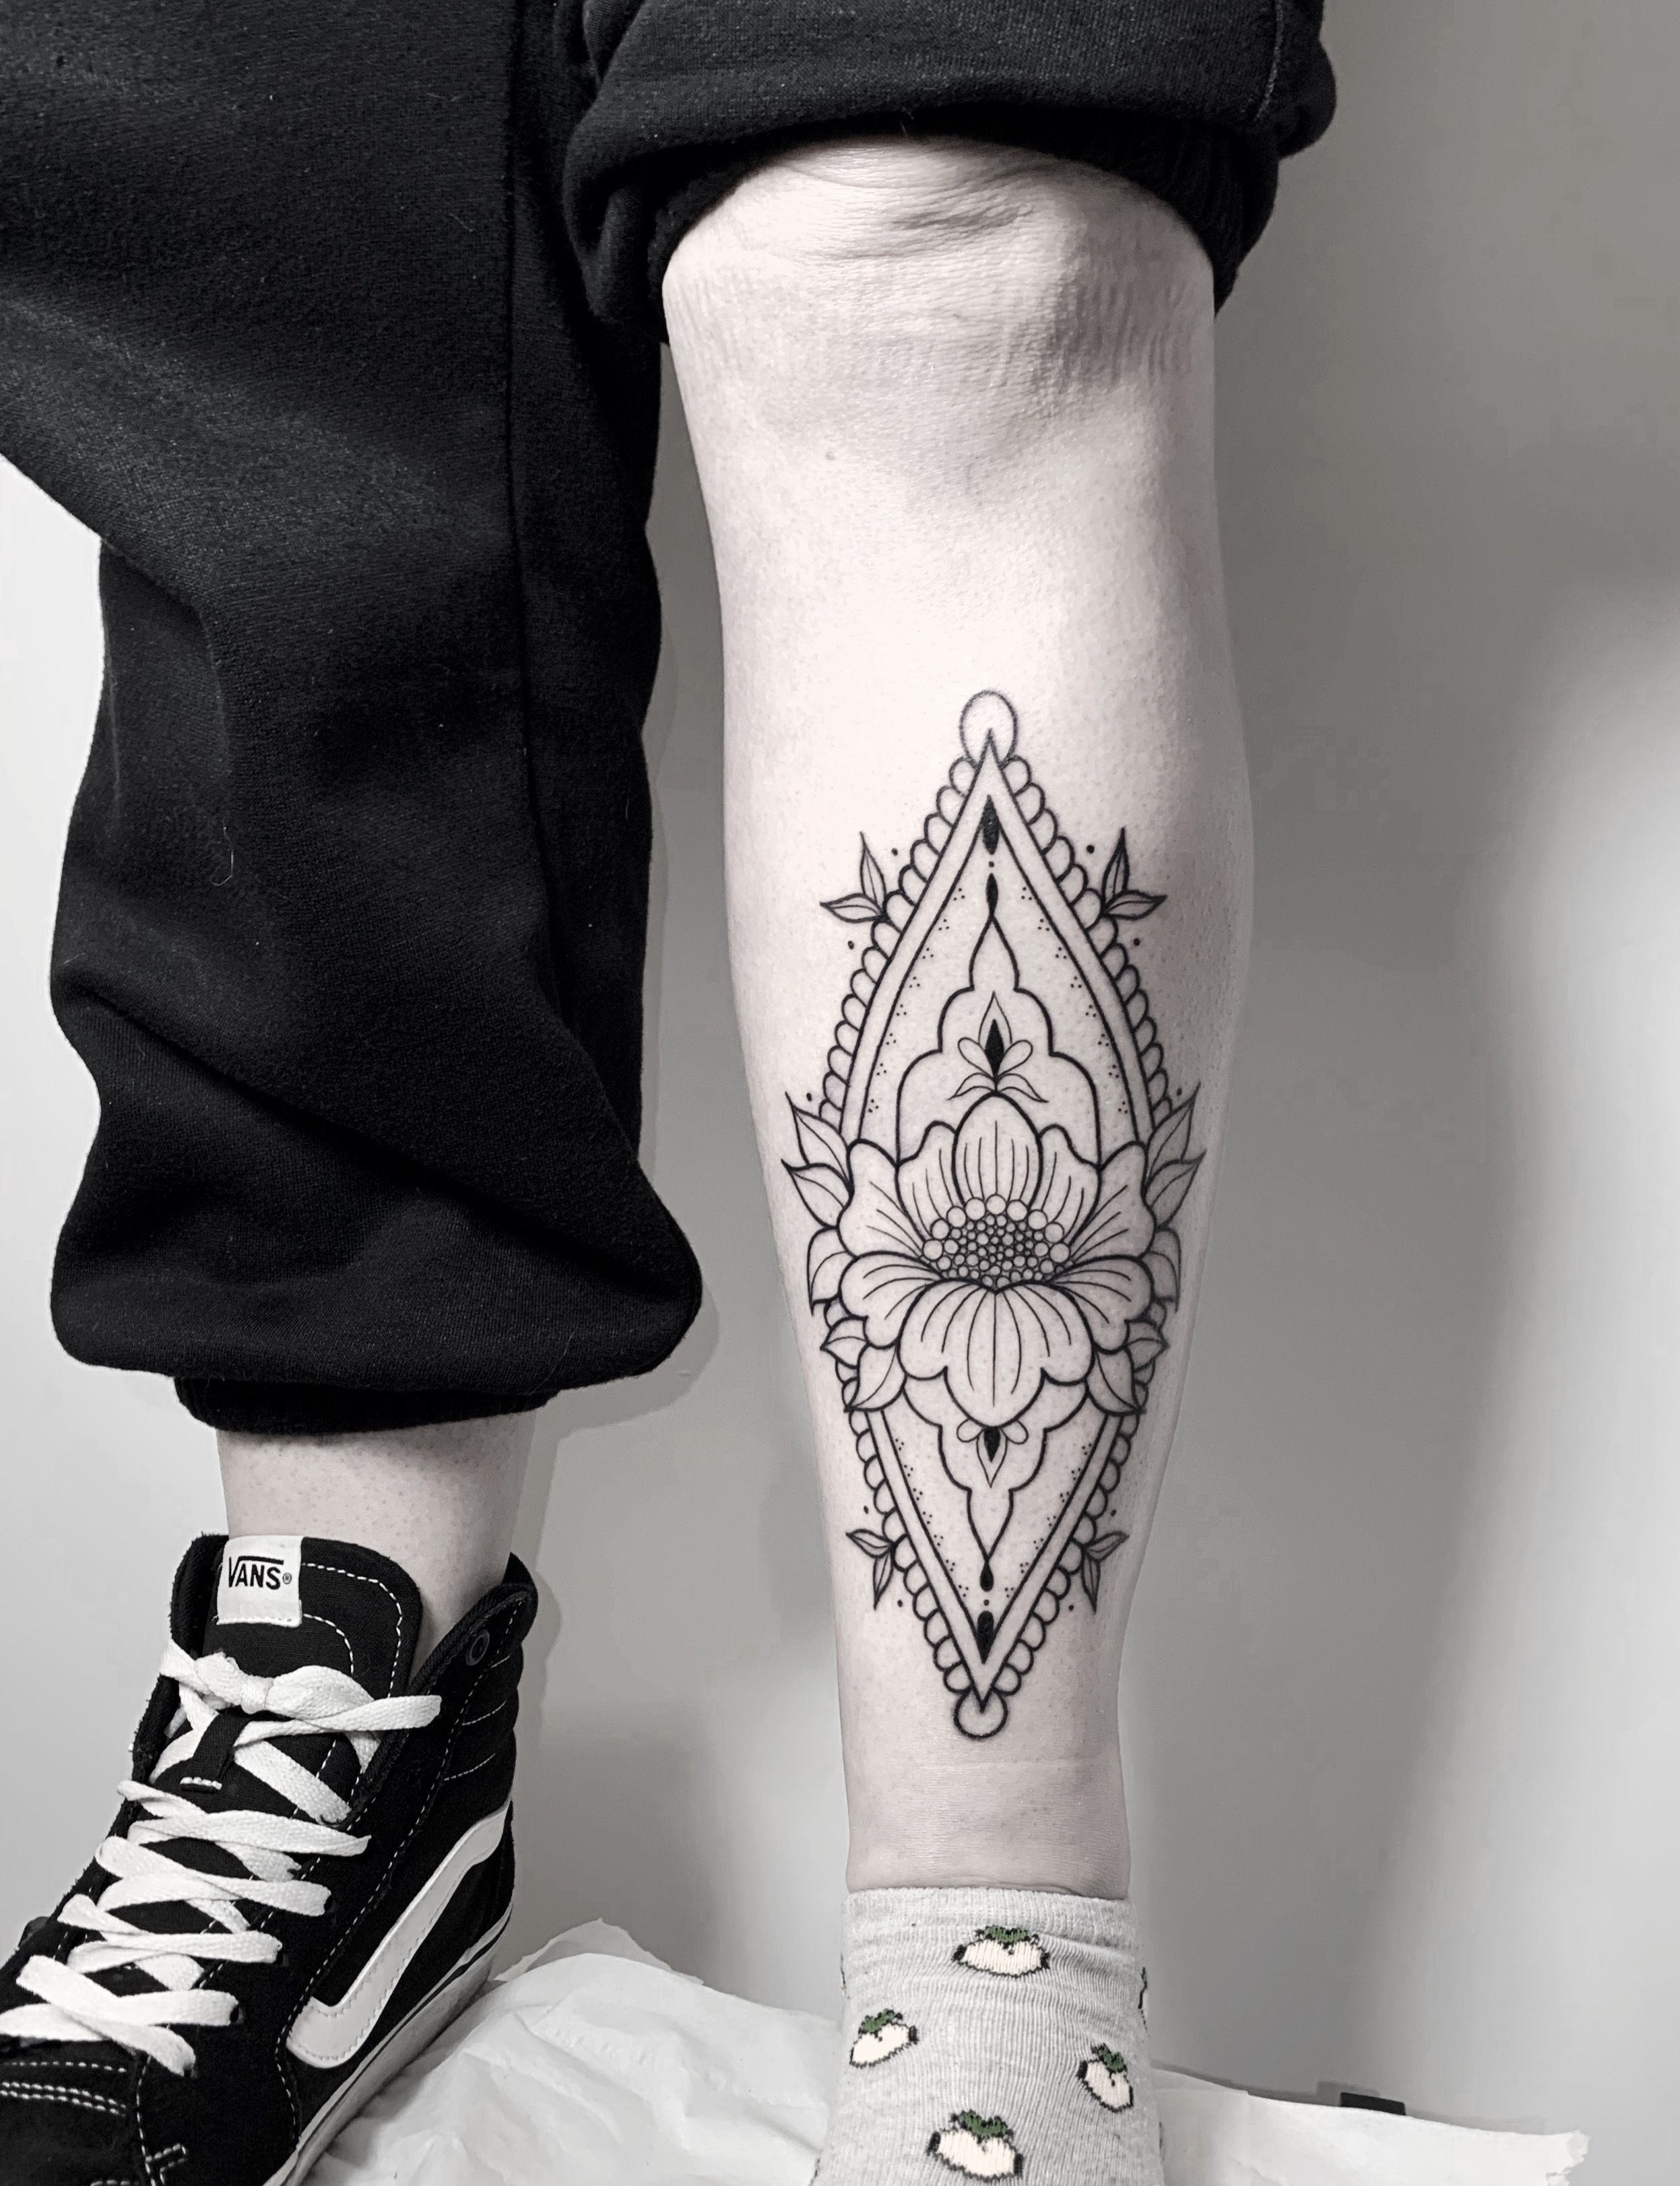 101 Best Small Shin Tattoo Ideas That Will Blow Your Mind!